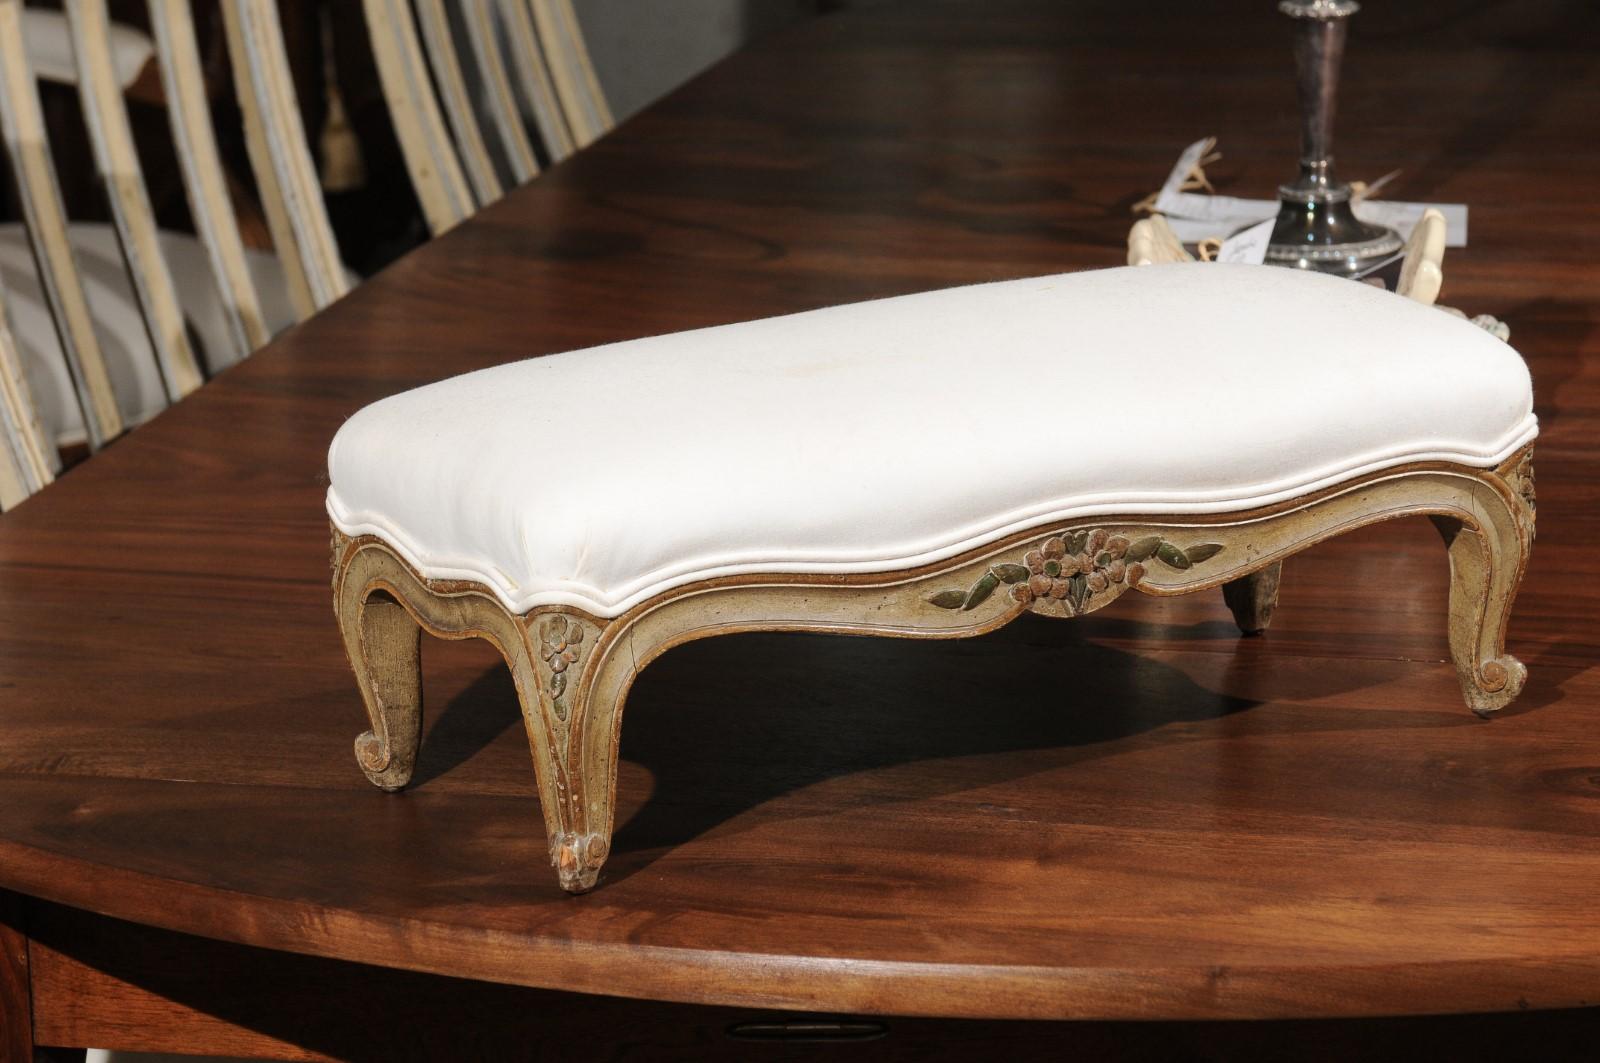 A French Louis XV style Provençal painted wood footstool from the 19th century, with new upholstery and carved accents. Born in Provence during the 19th century, this elegant footstool features a rectangular top covered in a new double welt cotton